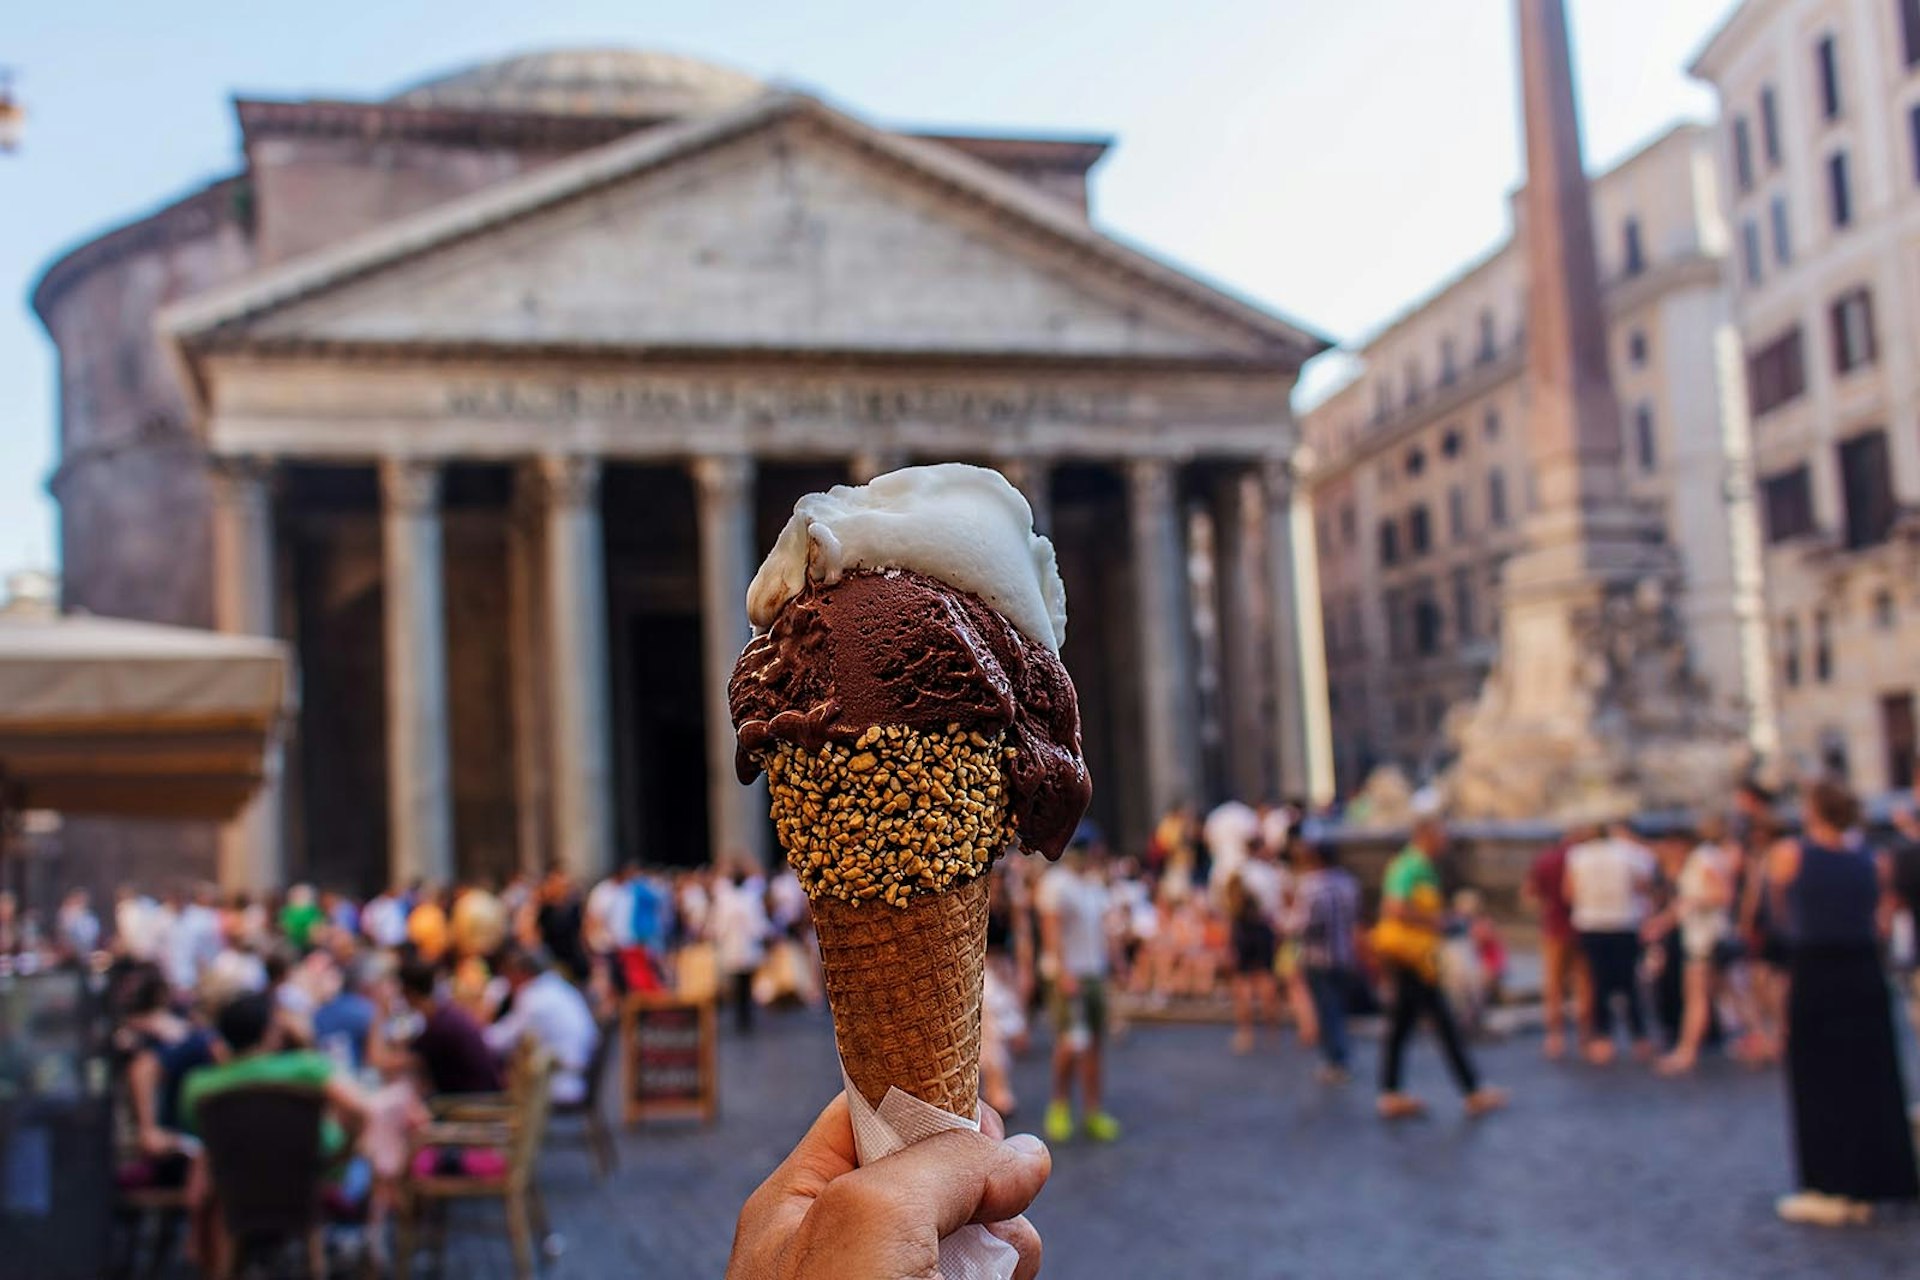 A hand holding a delicious cone of Italian gelato in front of the Pantheon in Rome